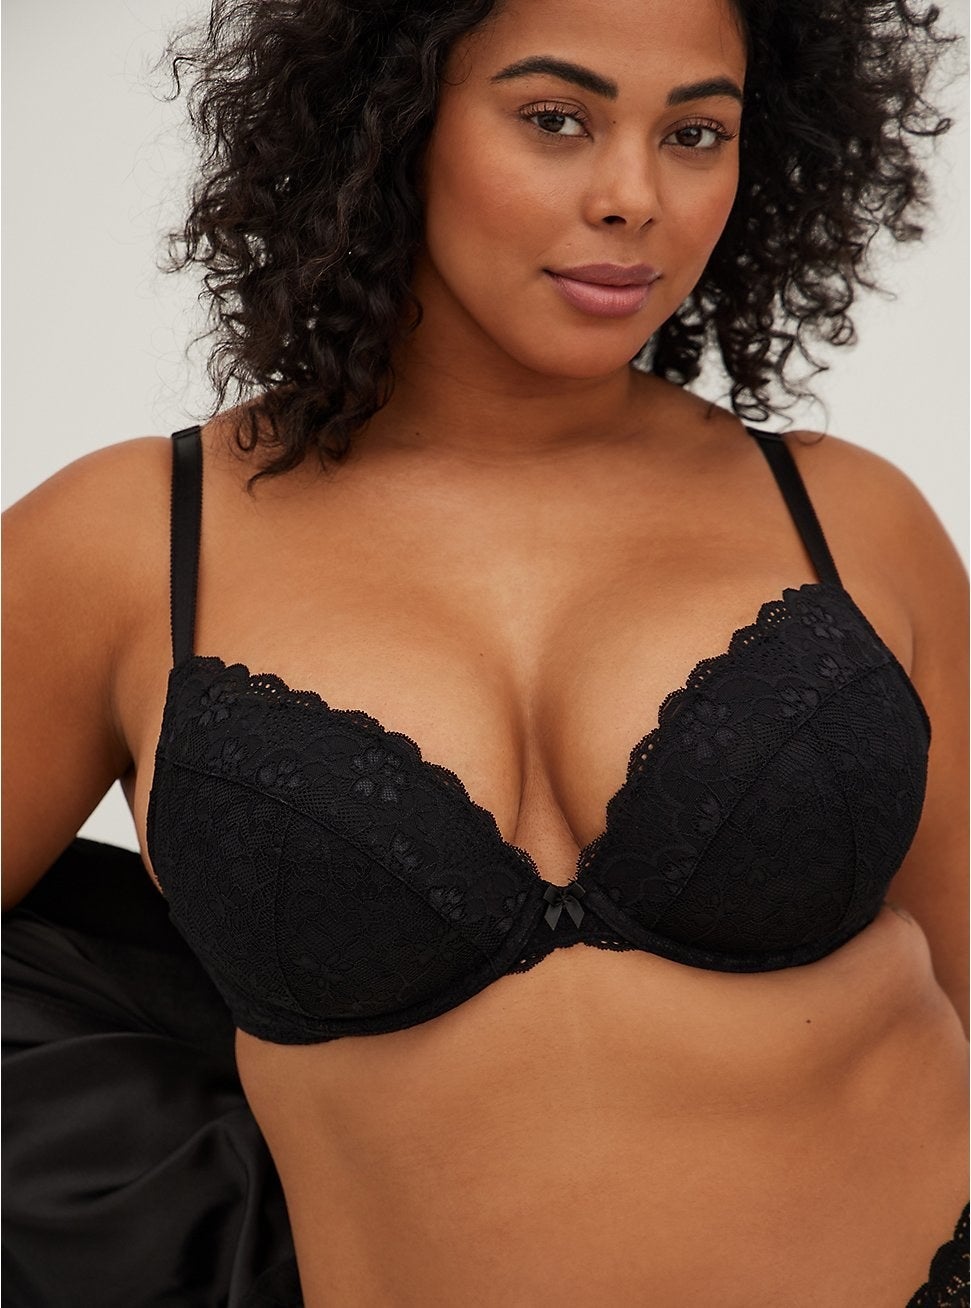 Plus Size - Red Removable Strap Lace Push-Up Plunge Bra - Torrid